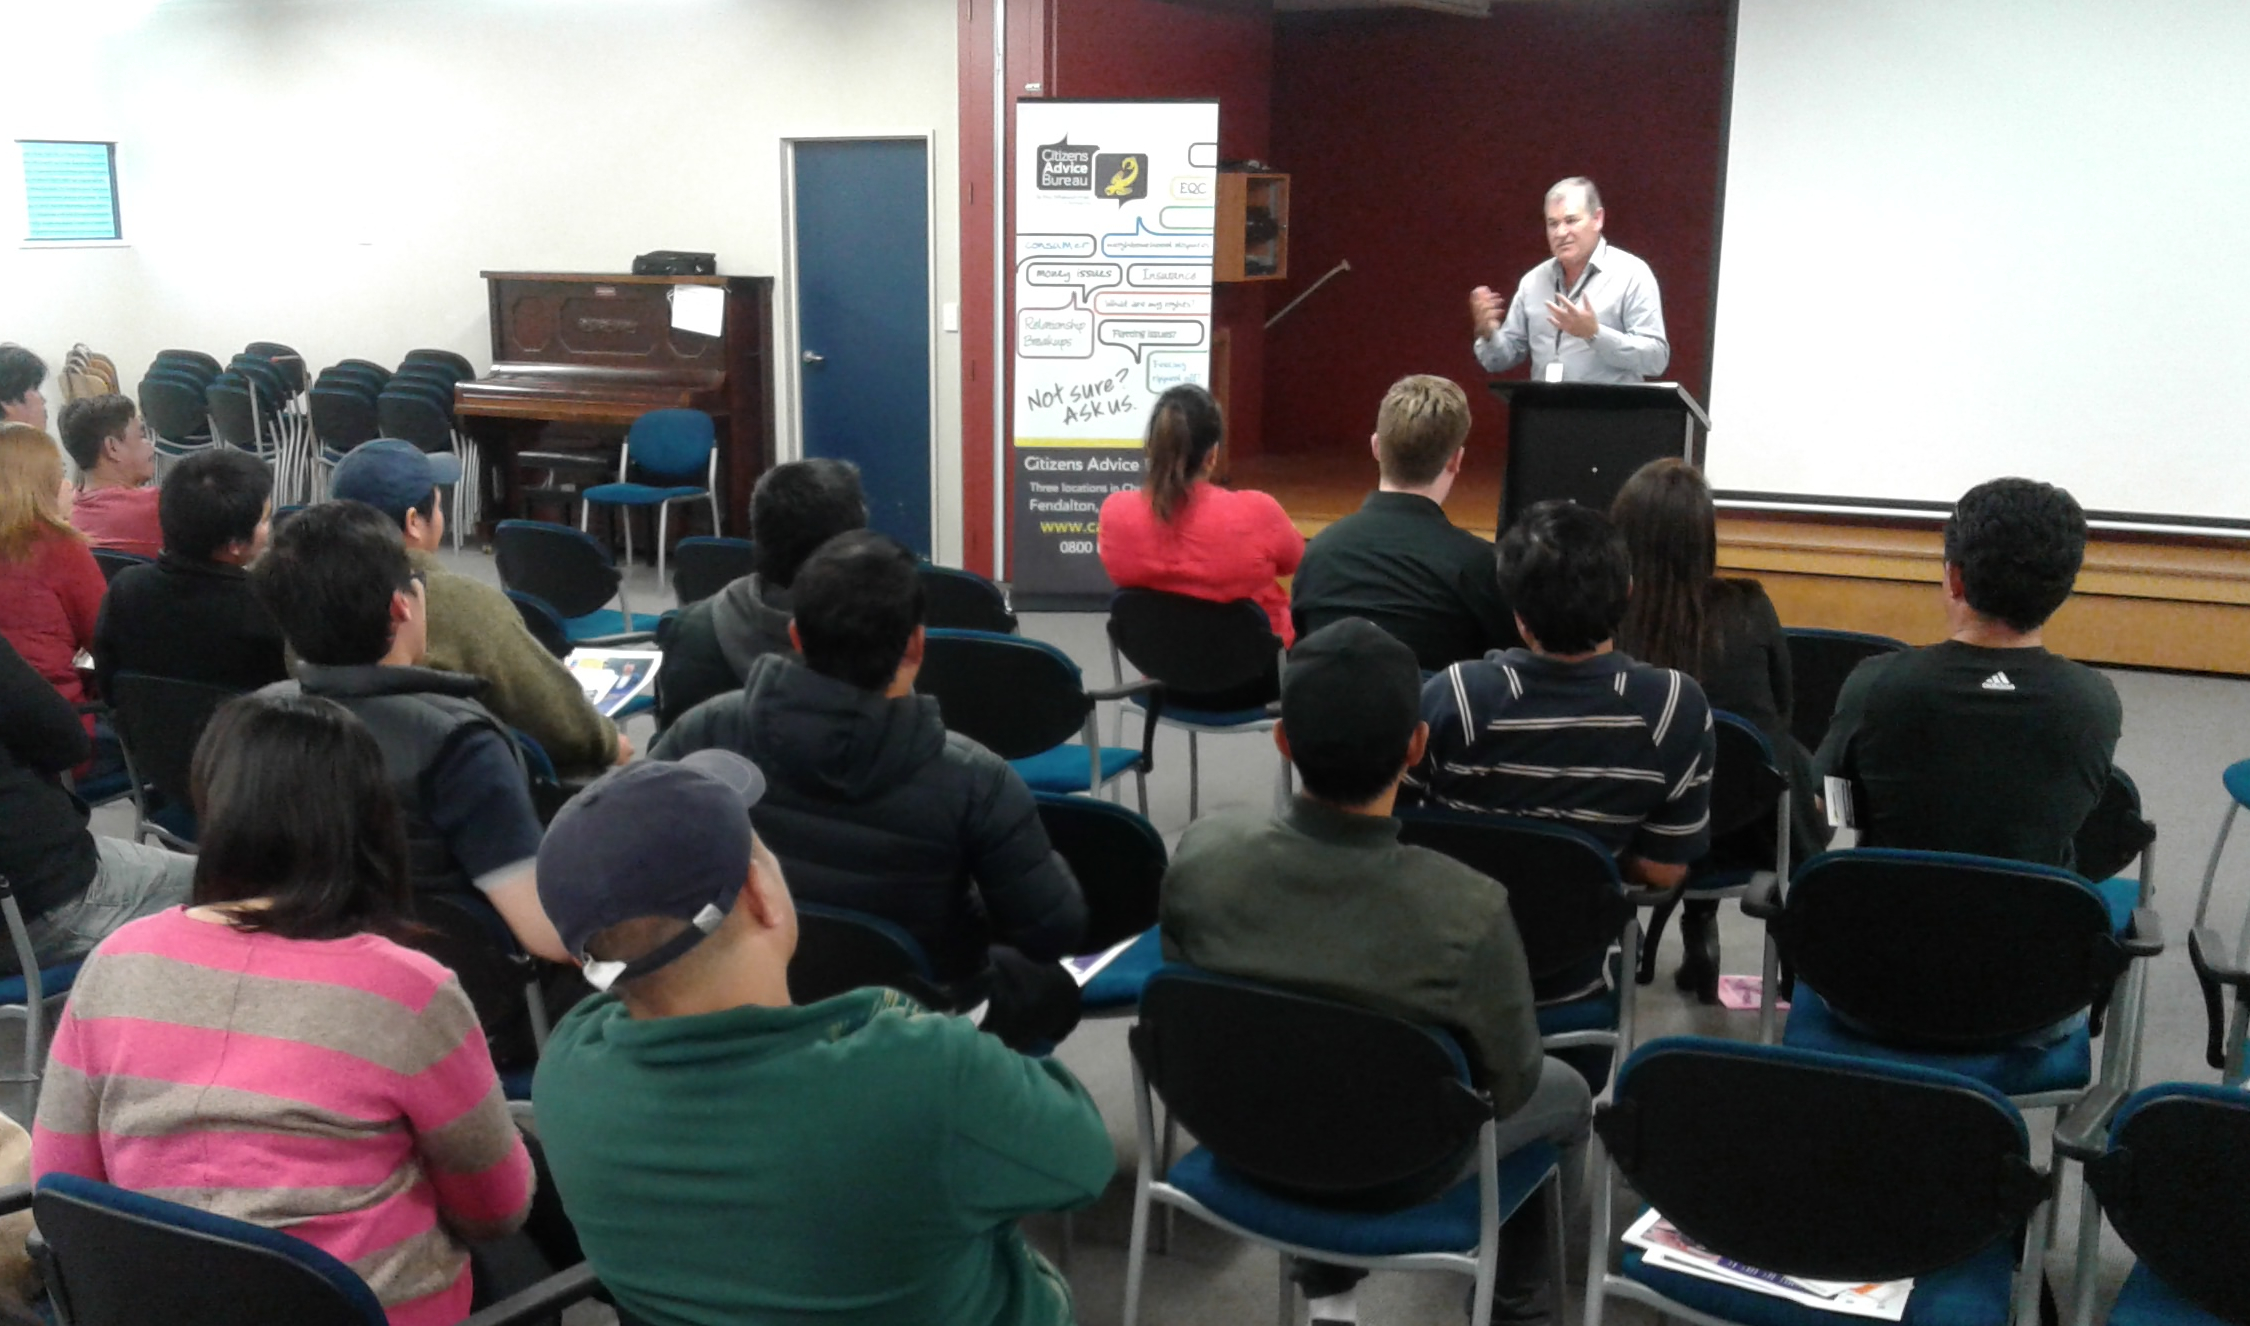  Gathering of Filipino dairy workers at a CAB seminar in Ashburton on March 29, where immigration issues and workers rights were discussed. (picture courtesy: Sally Carlton) 